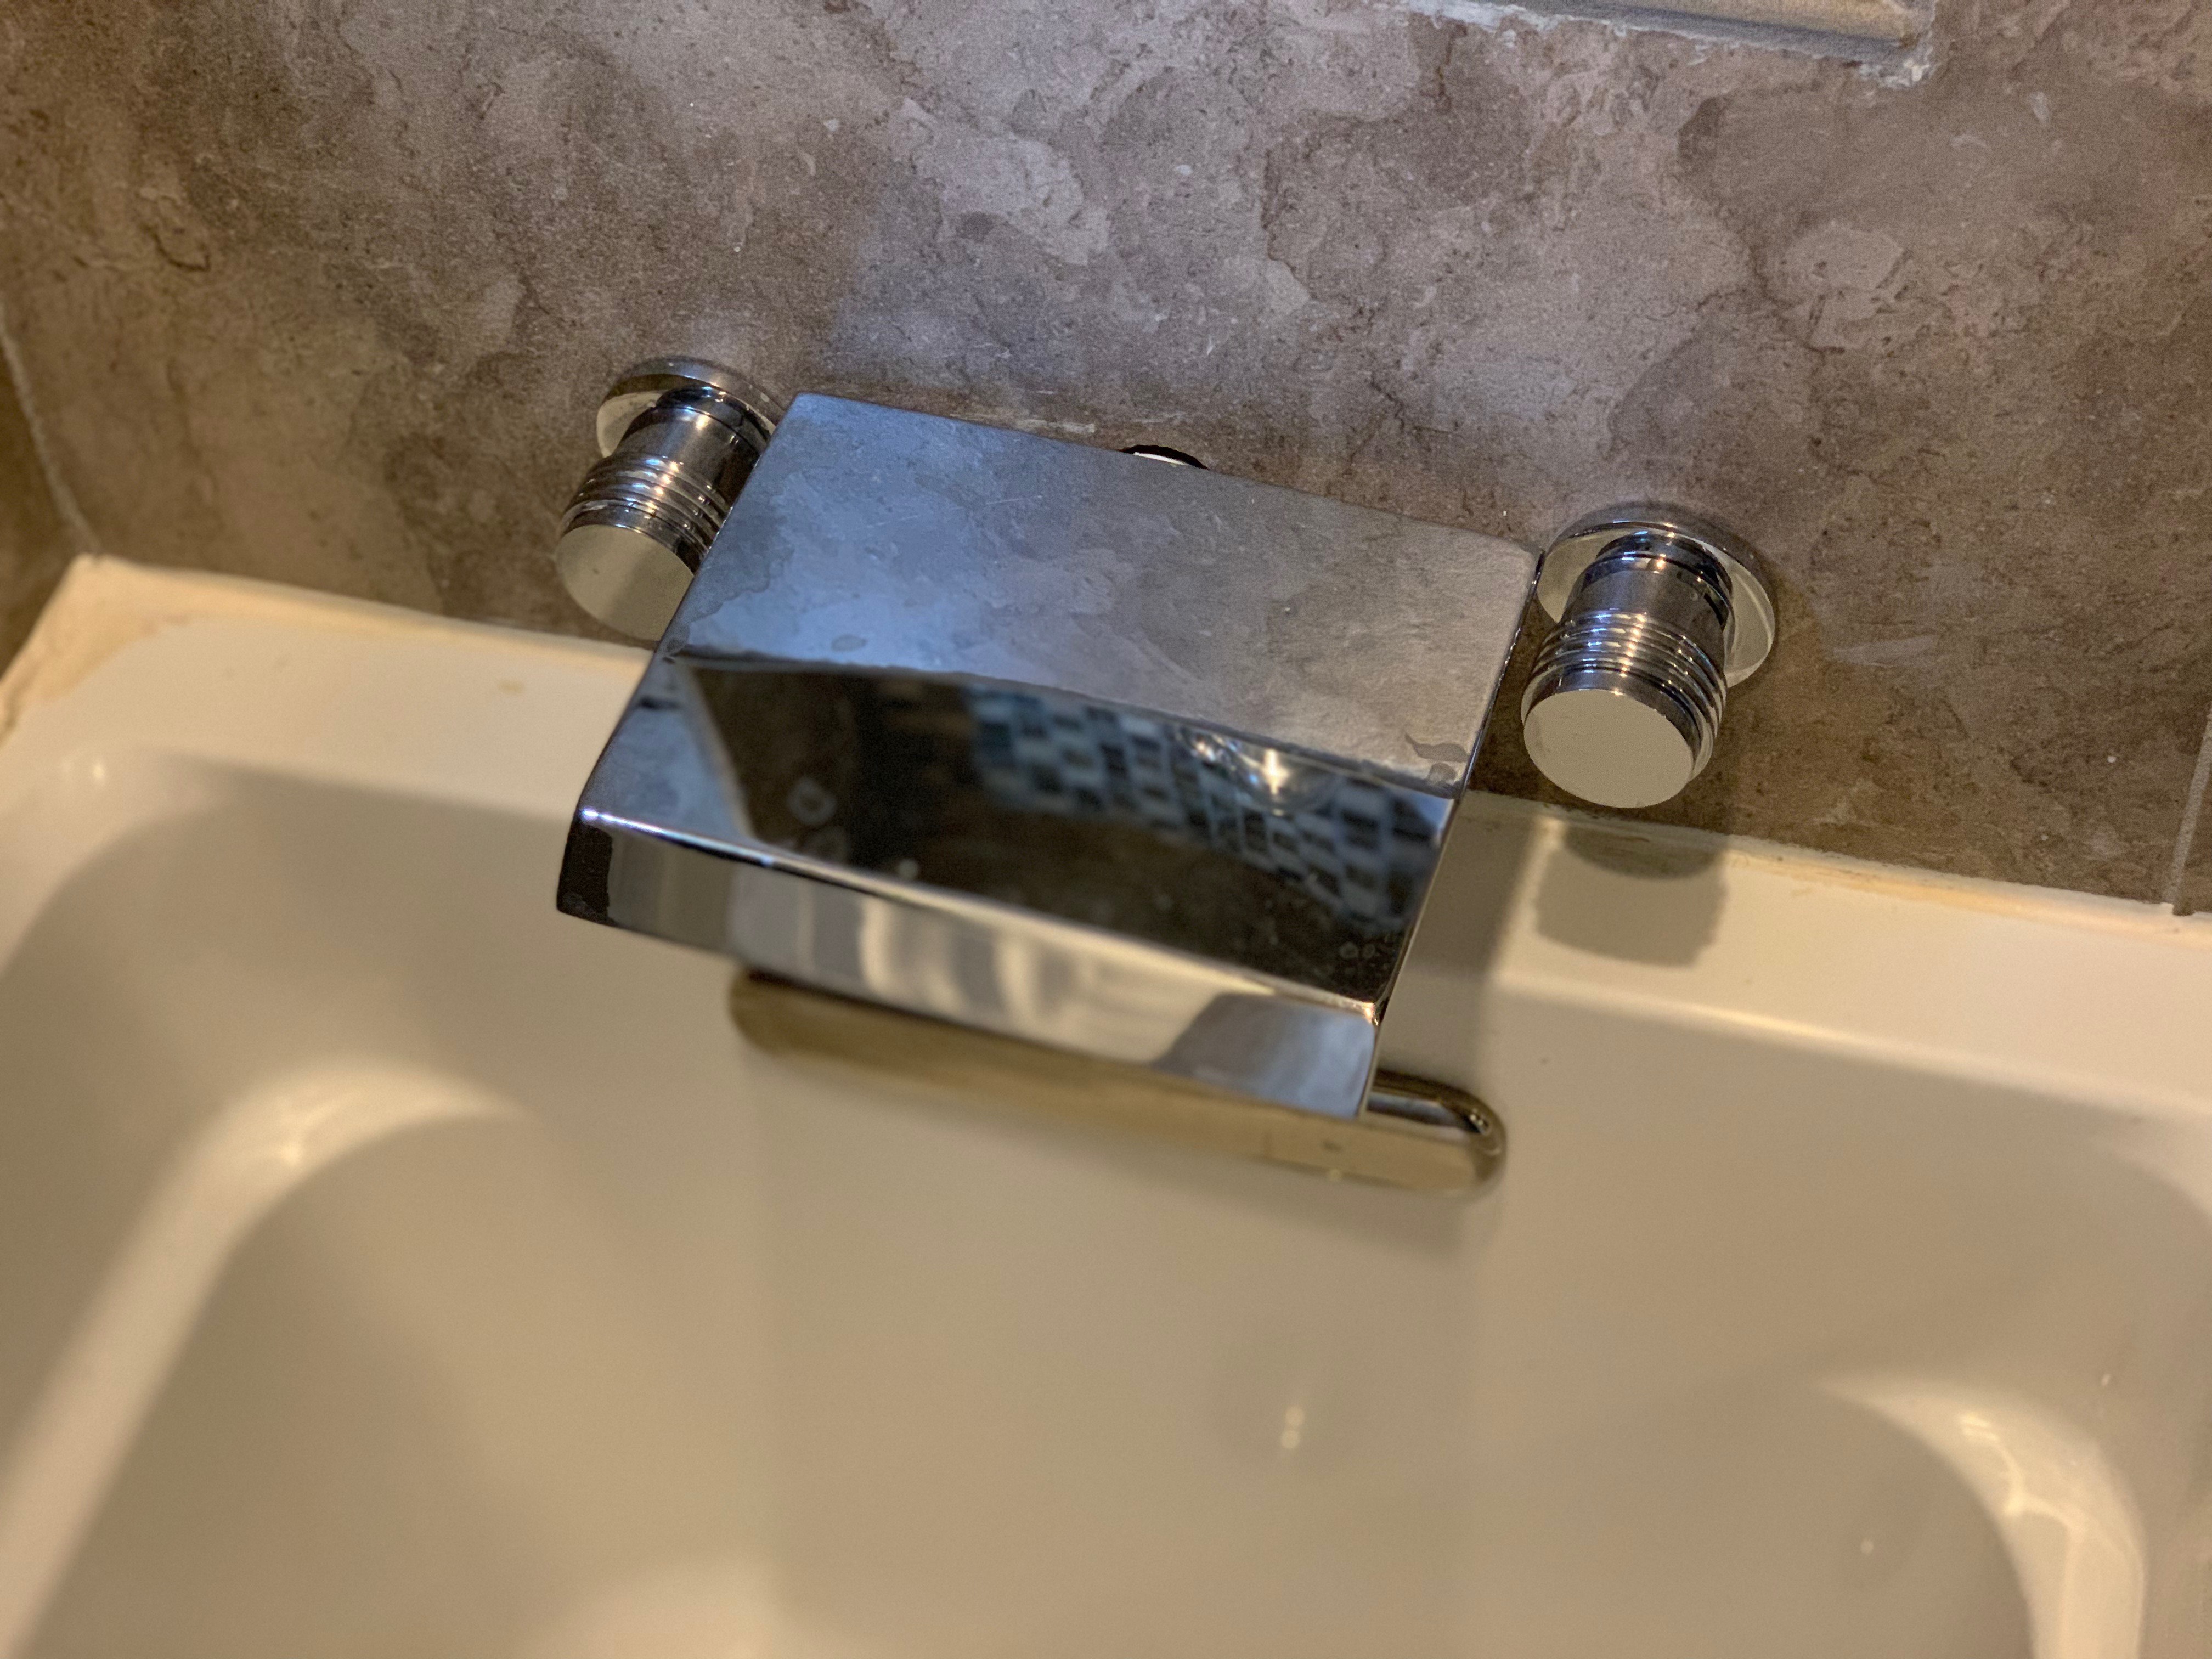 Cracked faucet. Installed incorrect